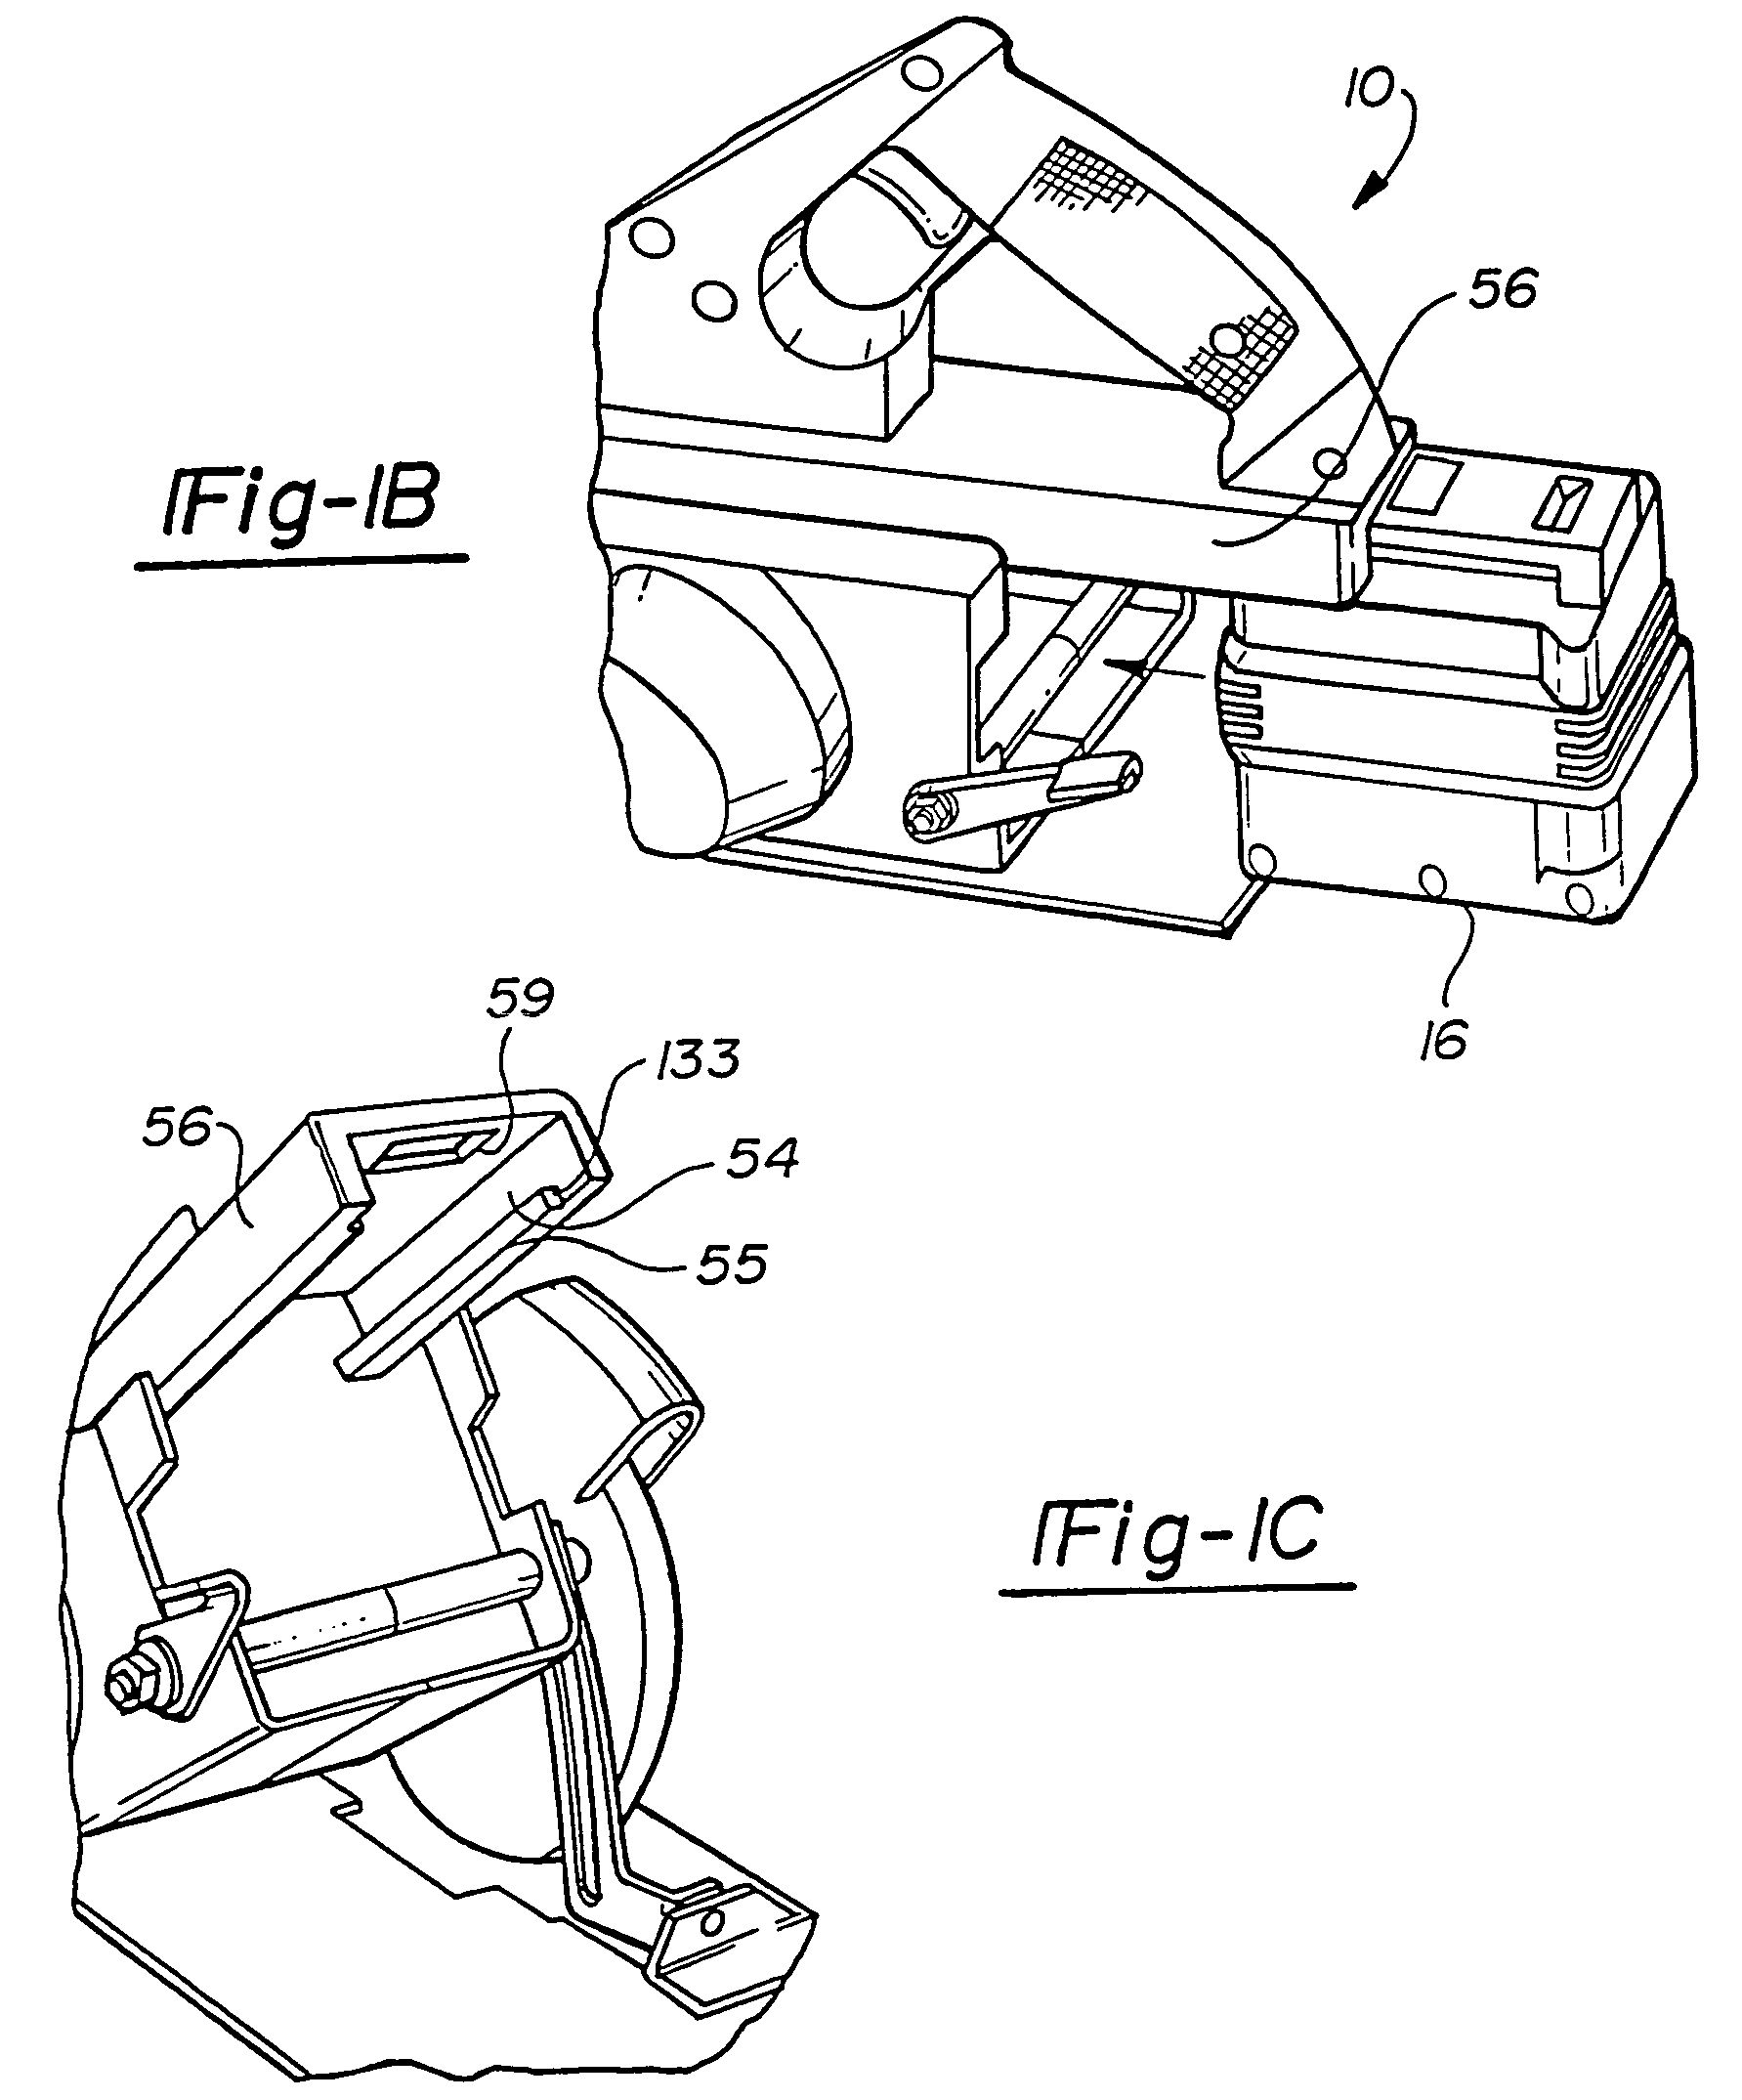 Cordless power tool system utilizing battery pack connection system with guide rails and guide slots